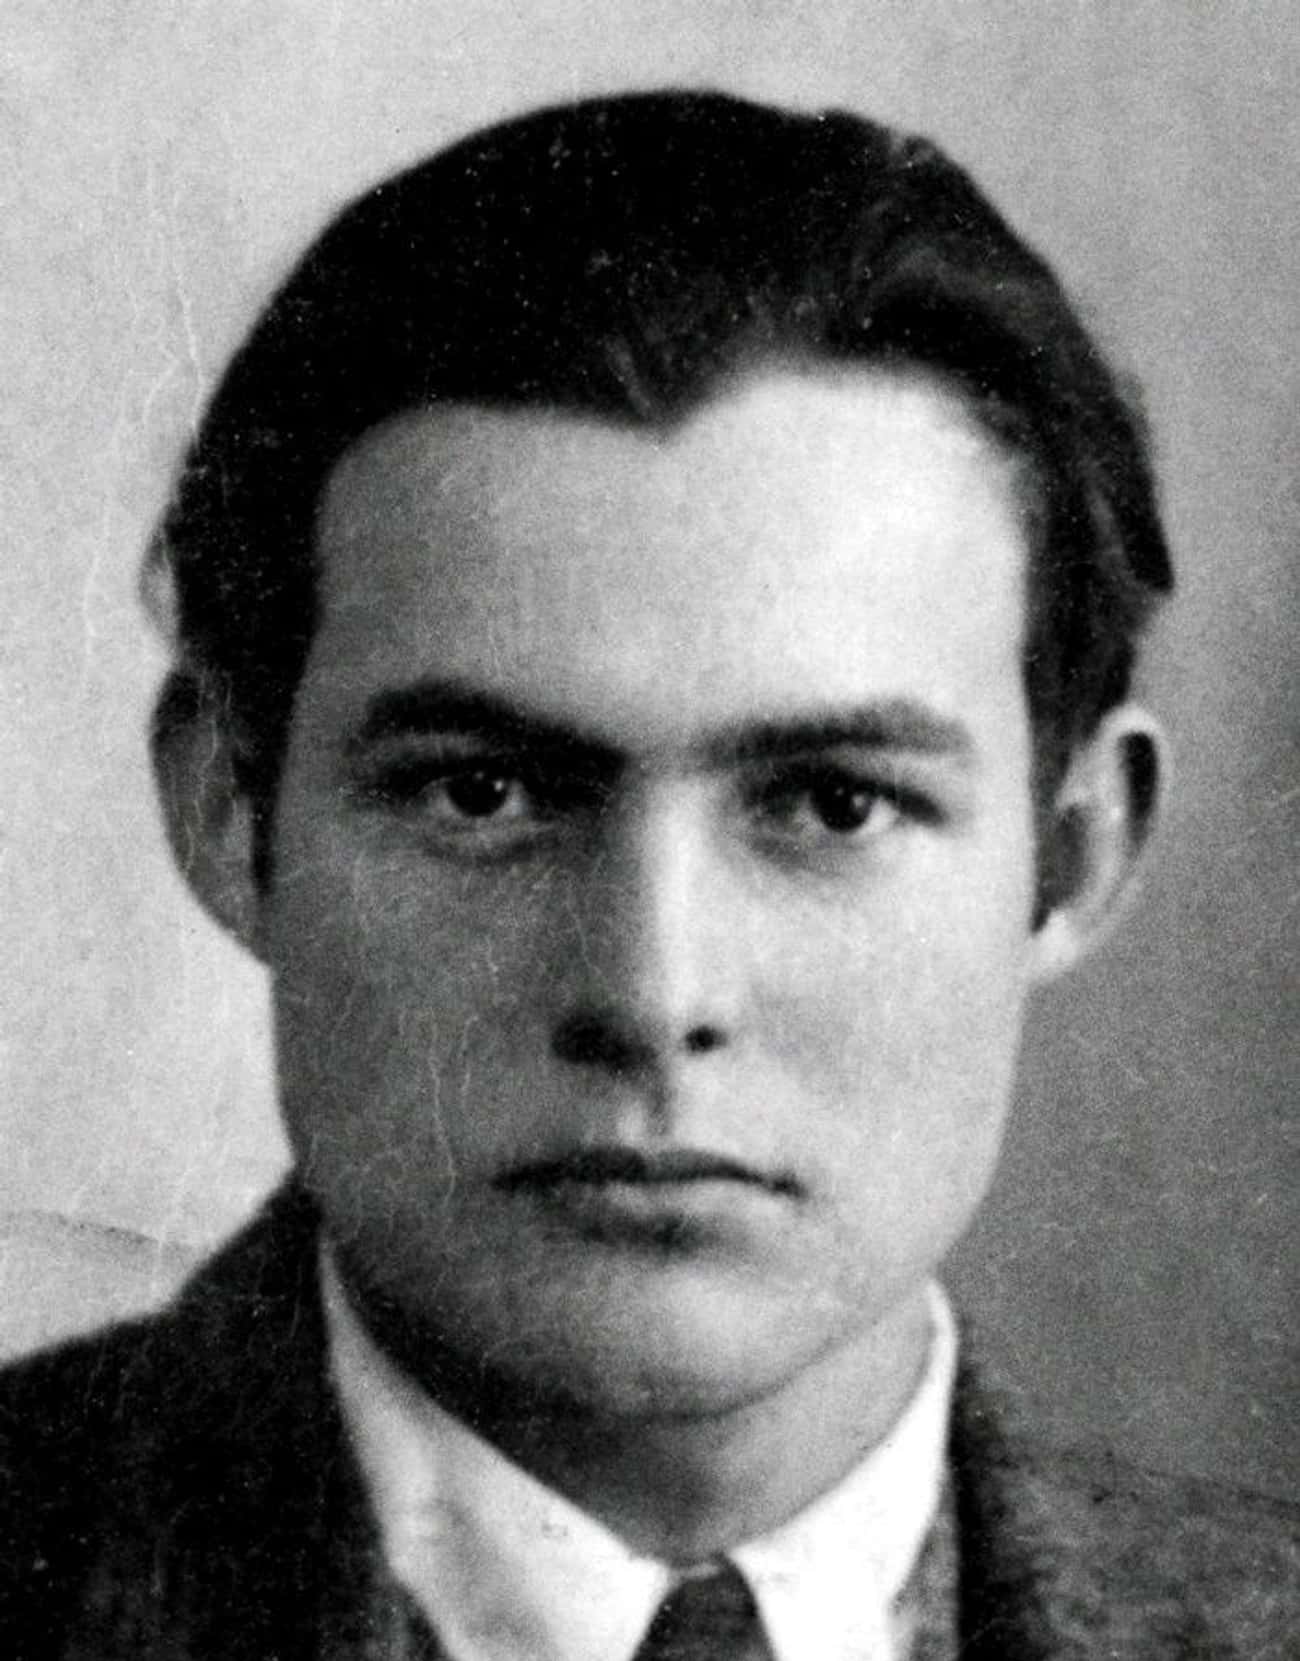 Ernest Hemingway Was Into, Uh, Role-Playing?